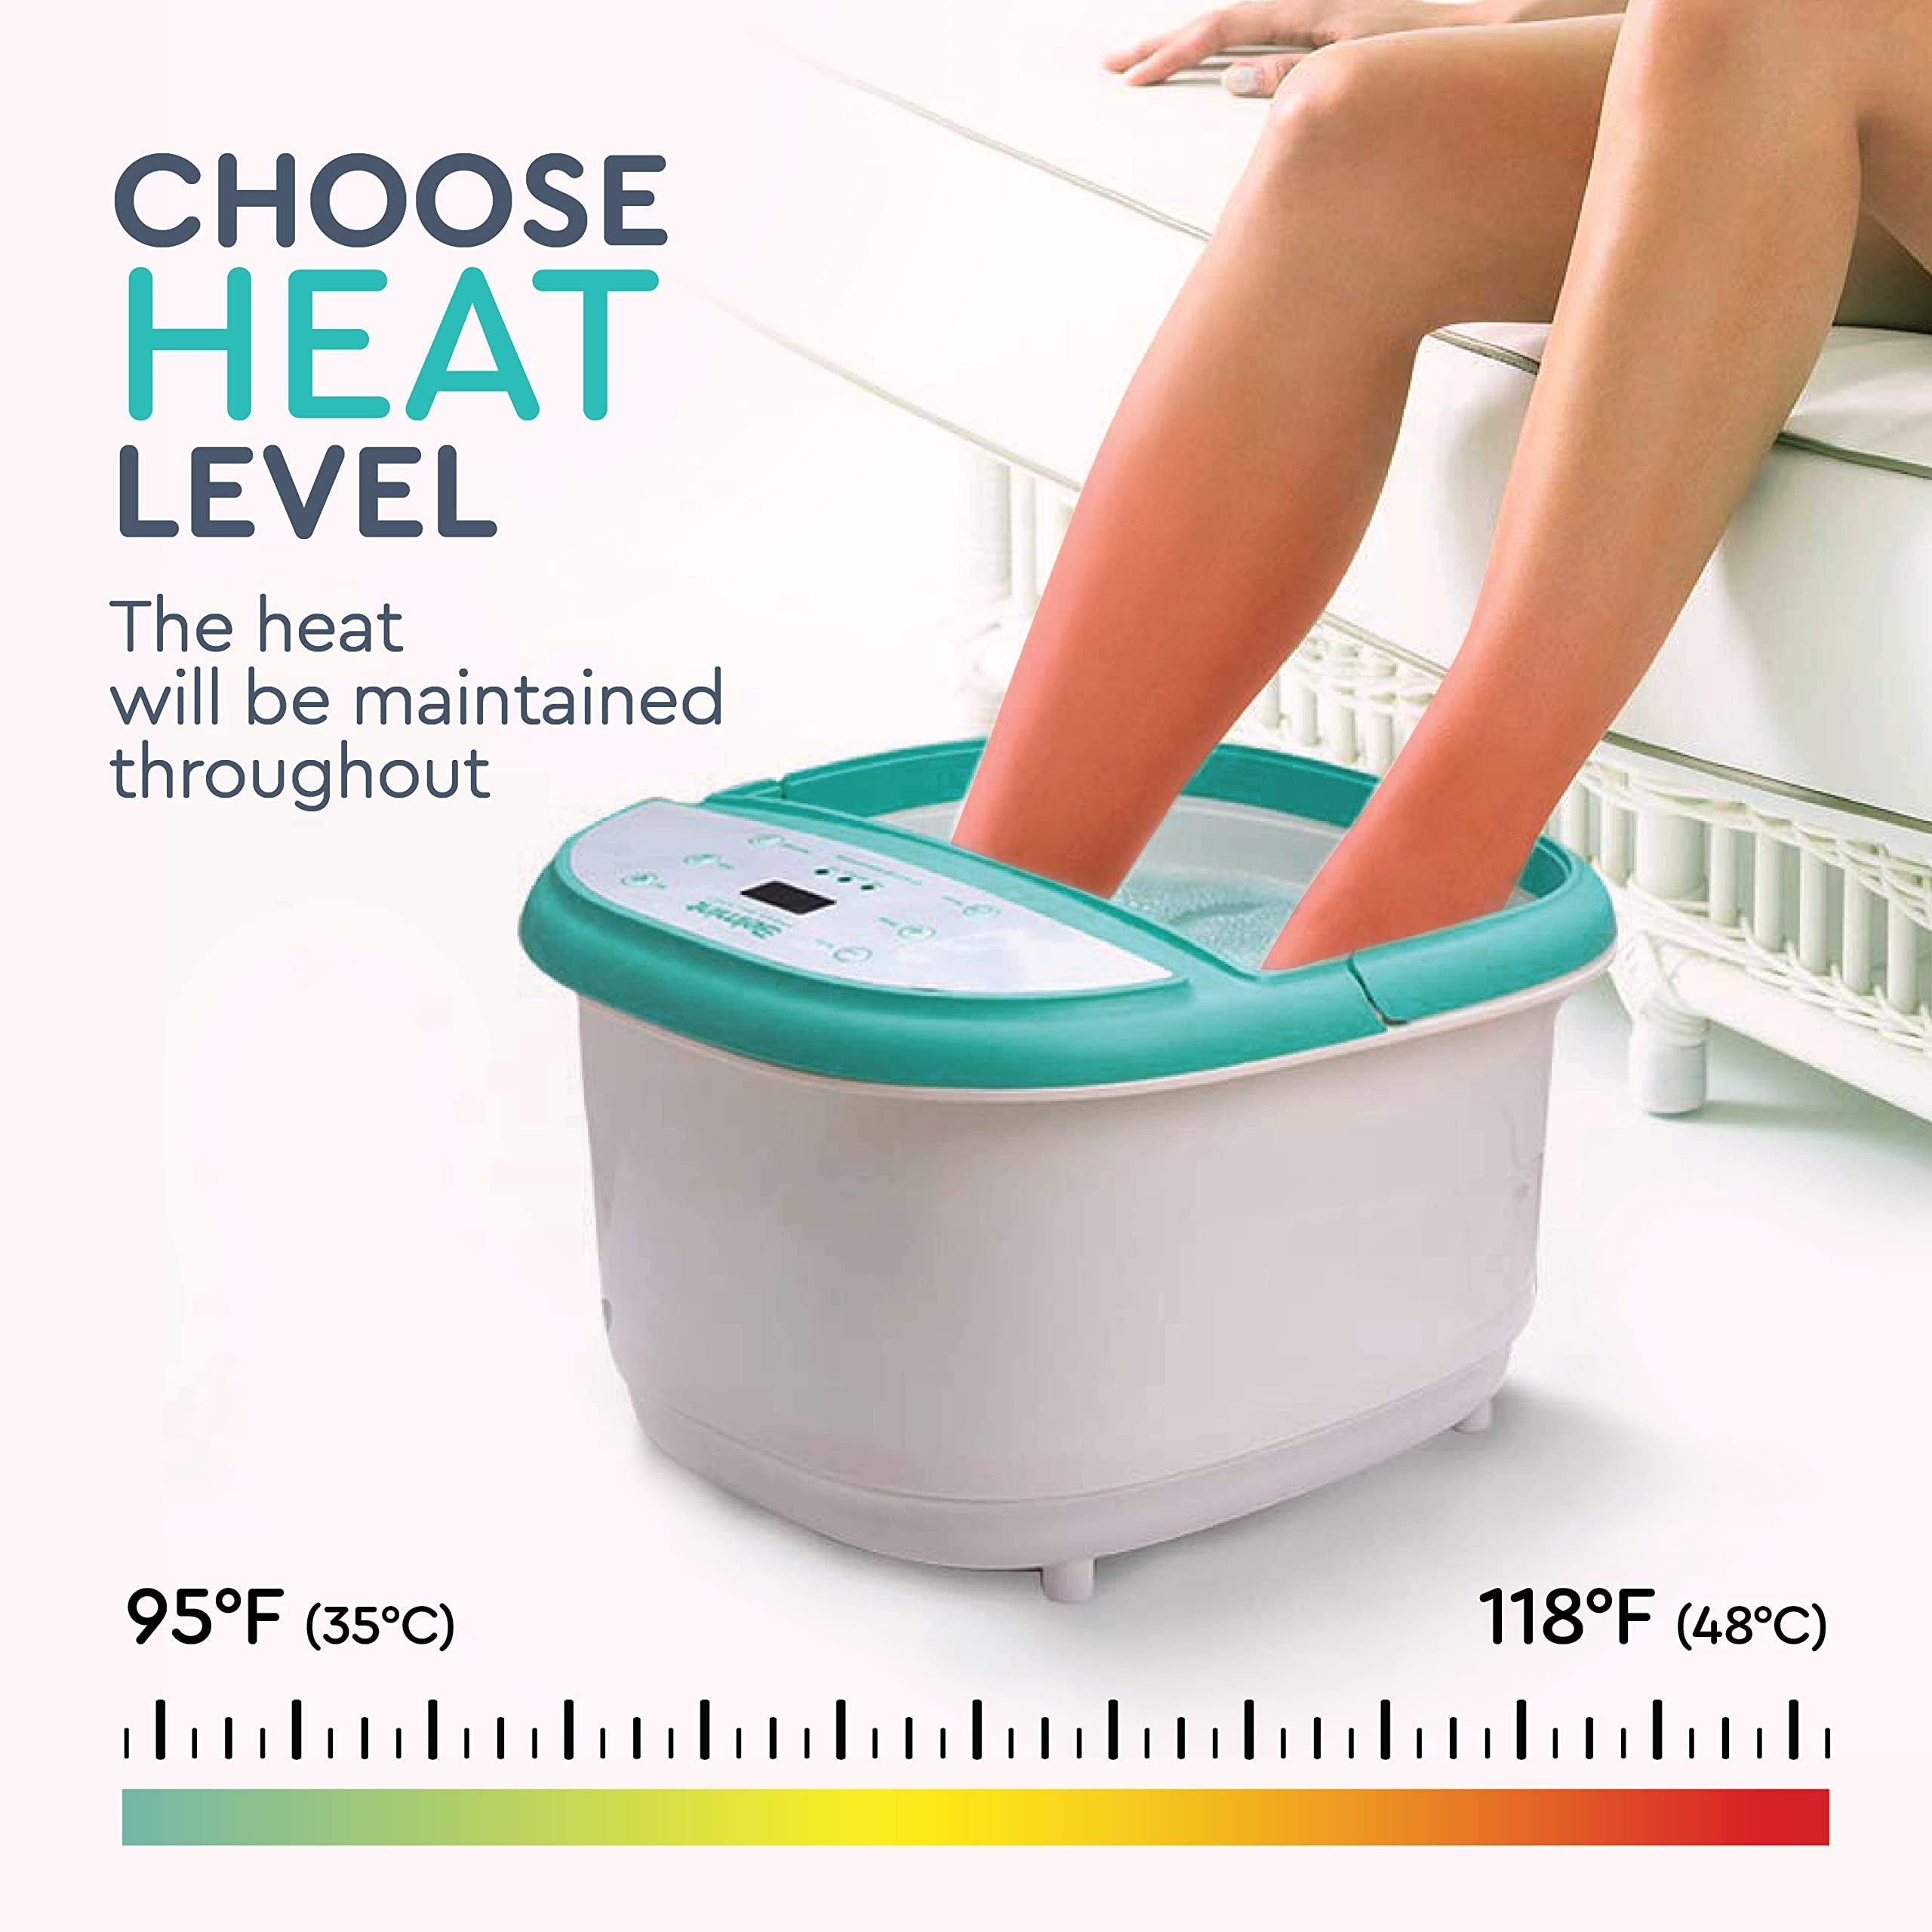 Foot Spa Foot Bath Massager - Feet Soaking Tub with Heat - Foot Bath with 6 Shiatsu Massage Rollers, Callus Remover, Adjustable Time & Temperature - Stress Relief and Sooths Tired Feet